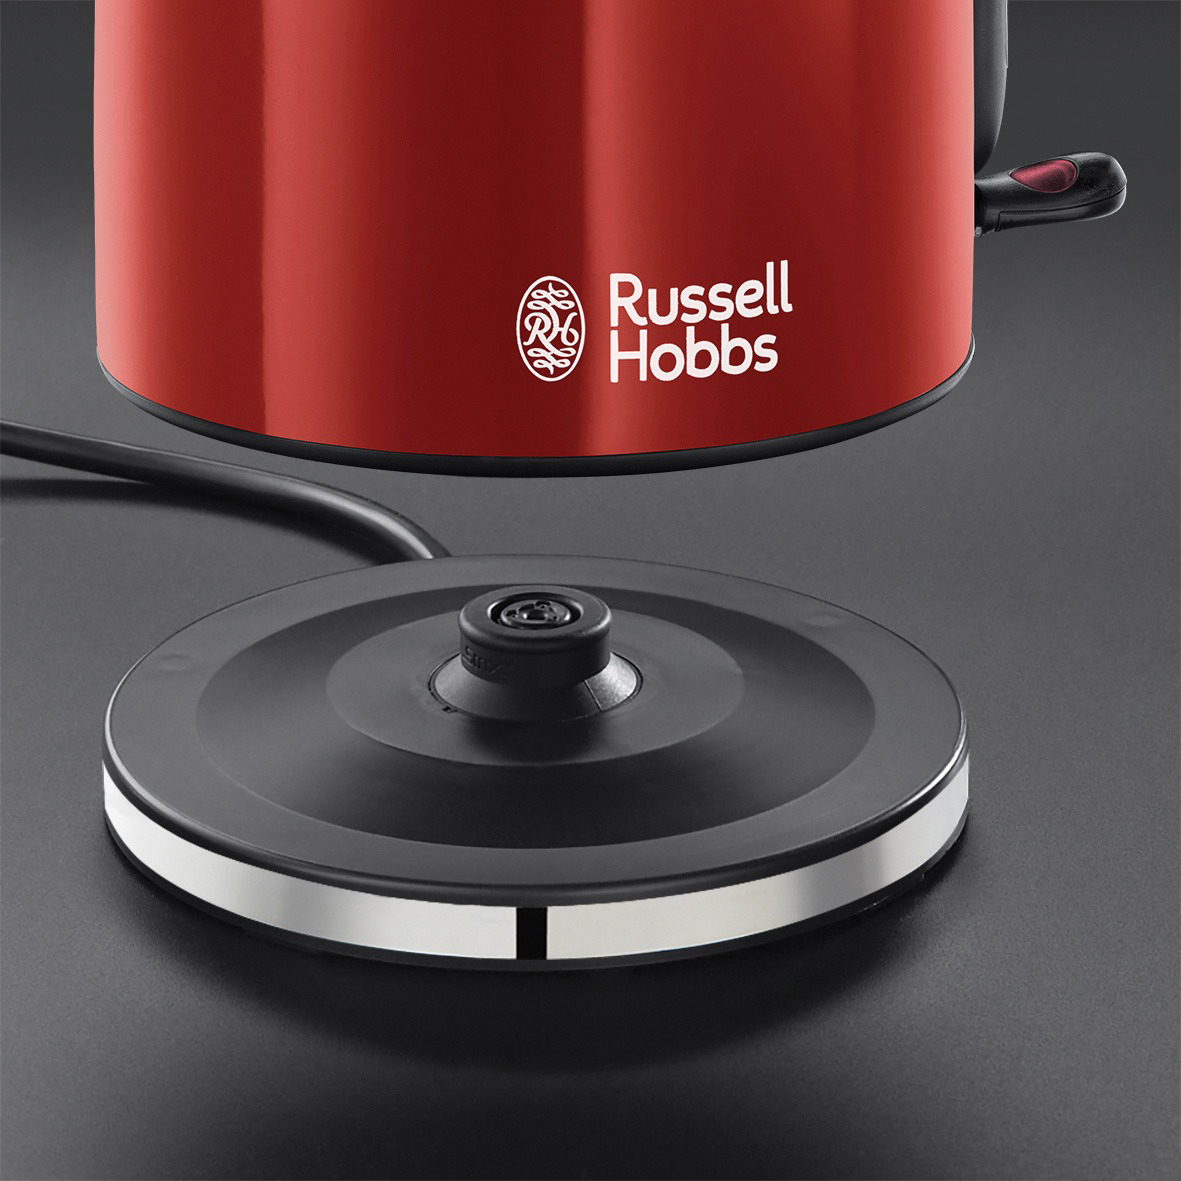 Електрочайник Russell Hobbs 22591-70 Colours Plus Red 1.7 л (23326016002) - фото 4